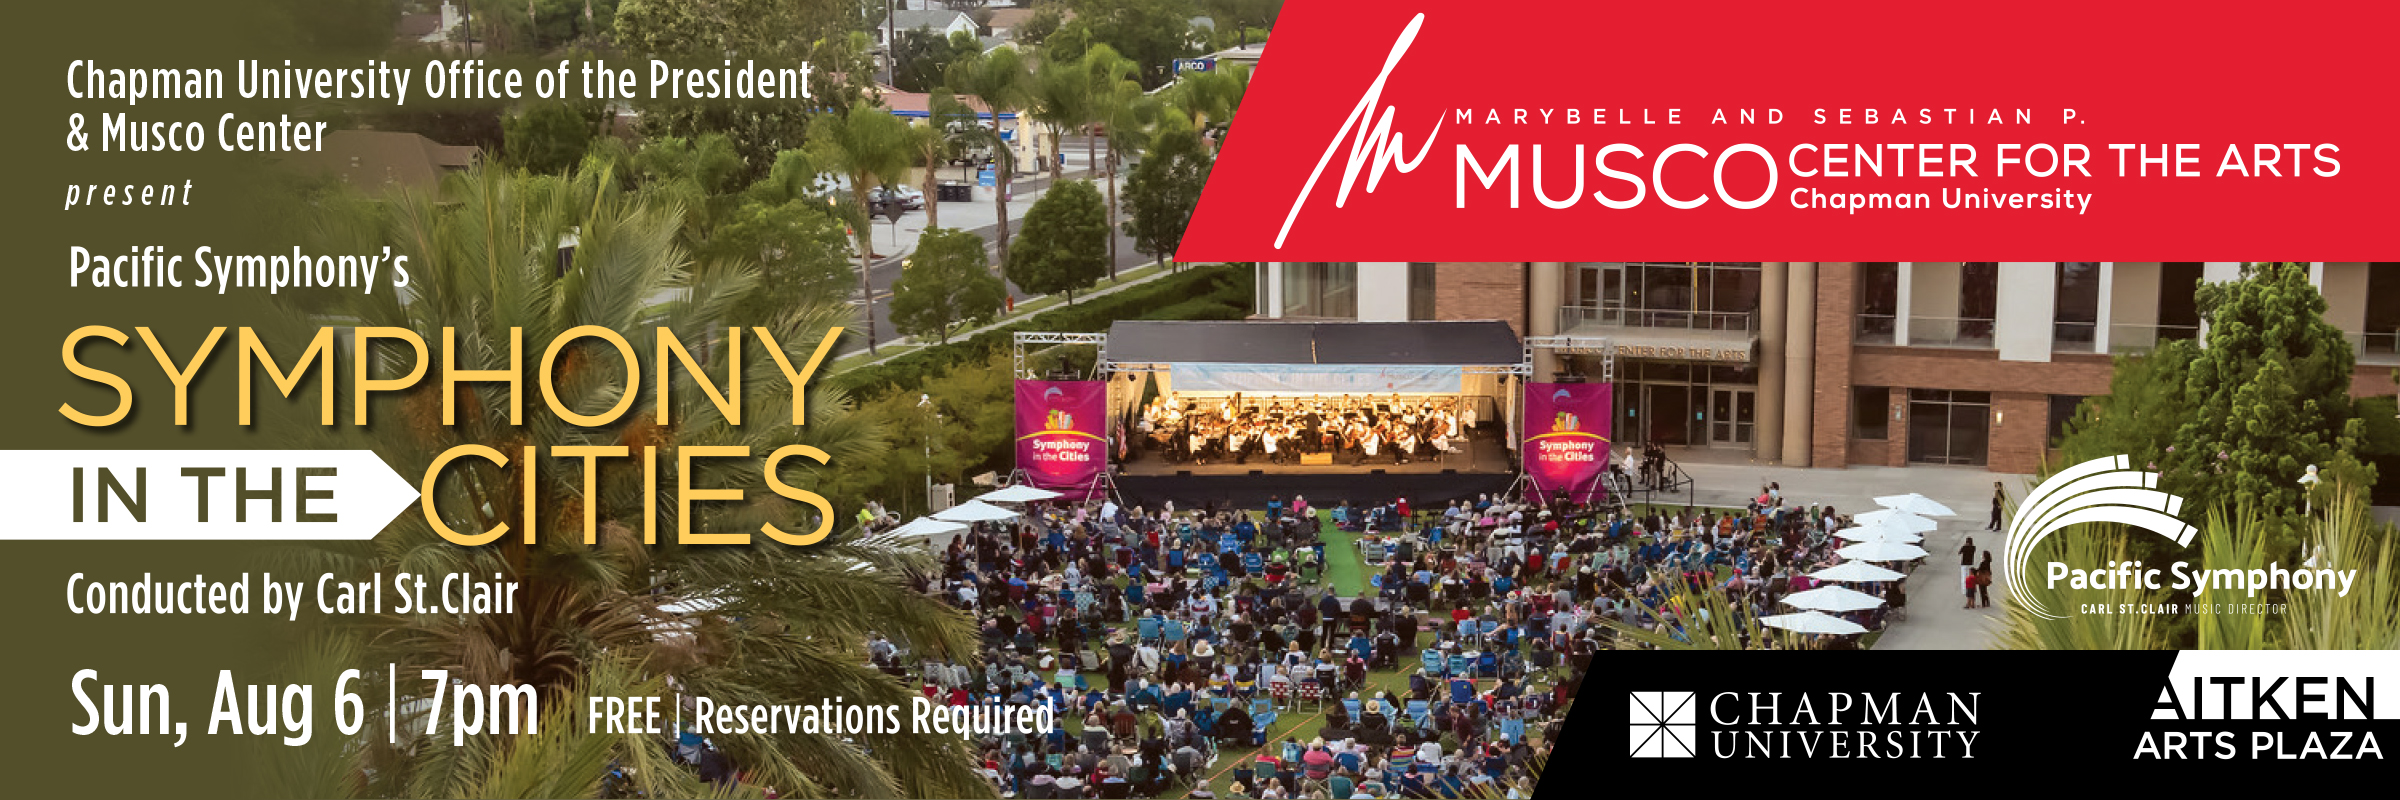 Marybelle and Sebastian P. Musco Center for the Arts, Chapman University and Pacific Symphony present Pacific Symphony's Symphonies in the City. Conducted by Carl St. Clair. Aitken Arts Plaza  Sun, Aug 6 | 7pm. Free | Reservations required. 